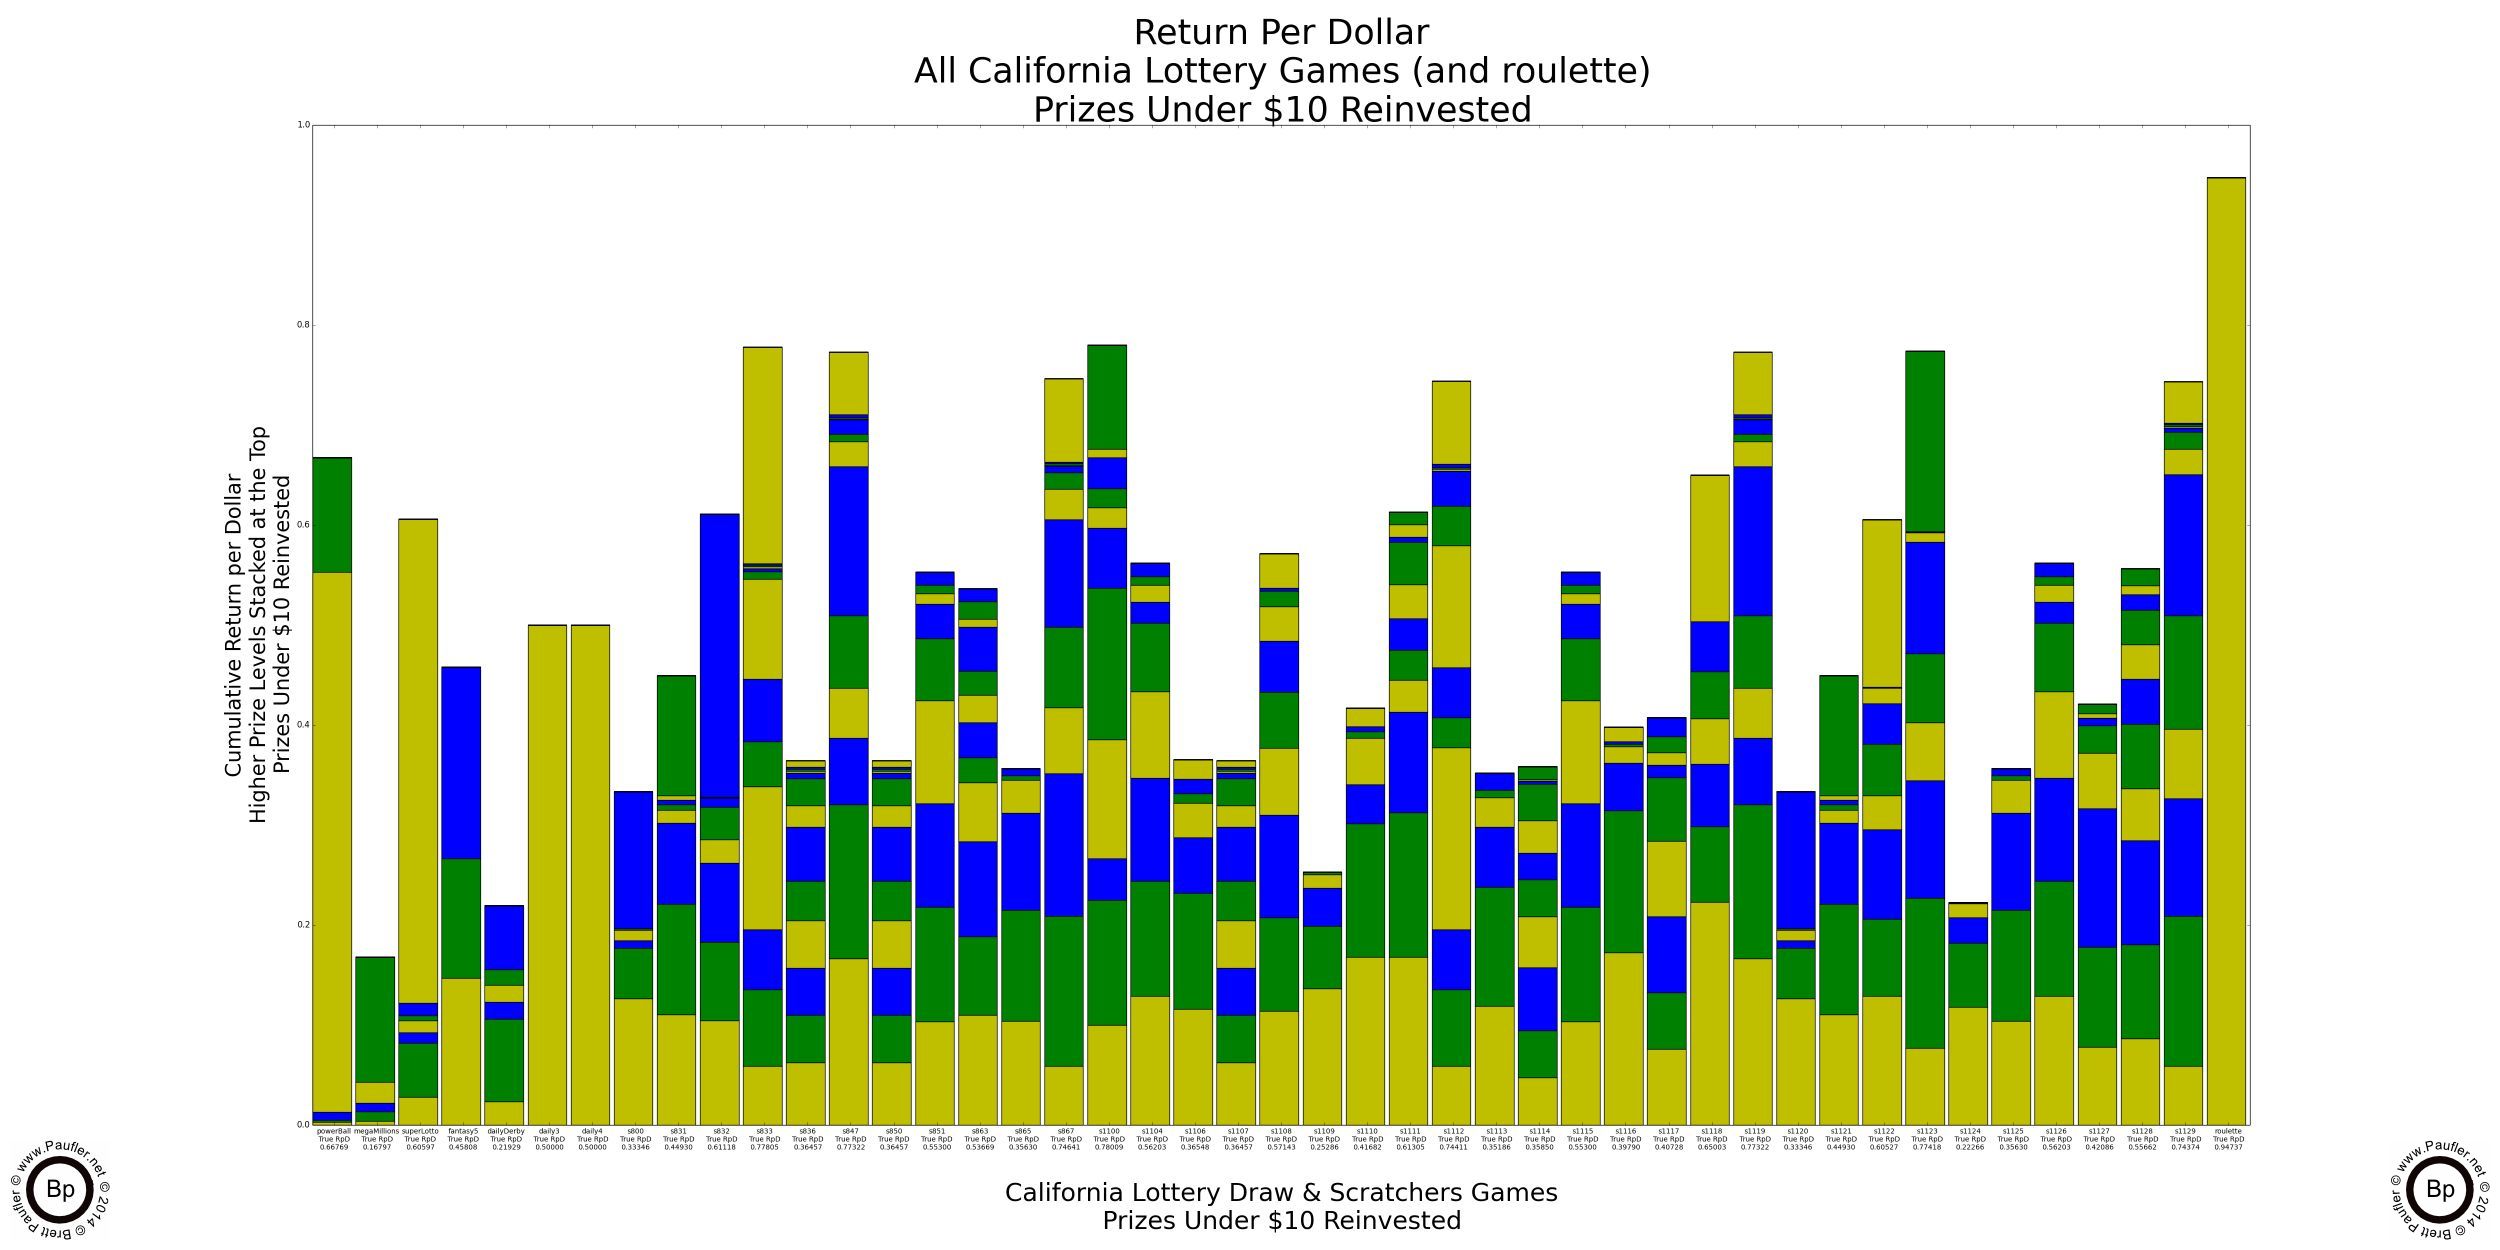 Graph of California Lottery Return per Dollar with Prizes below $10 Reinvested